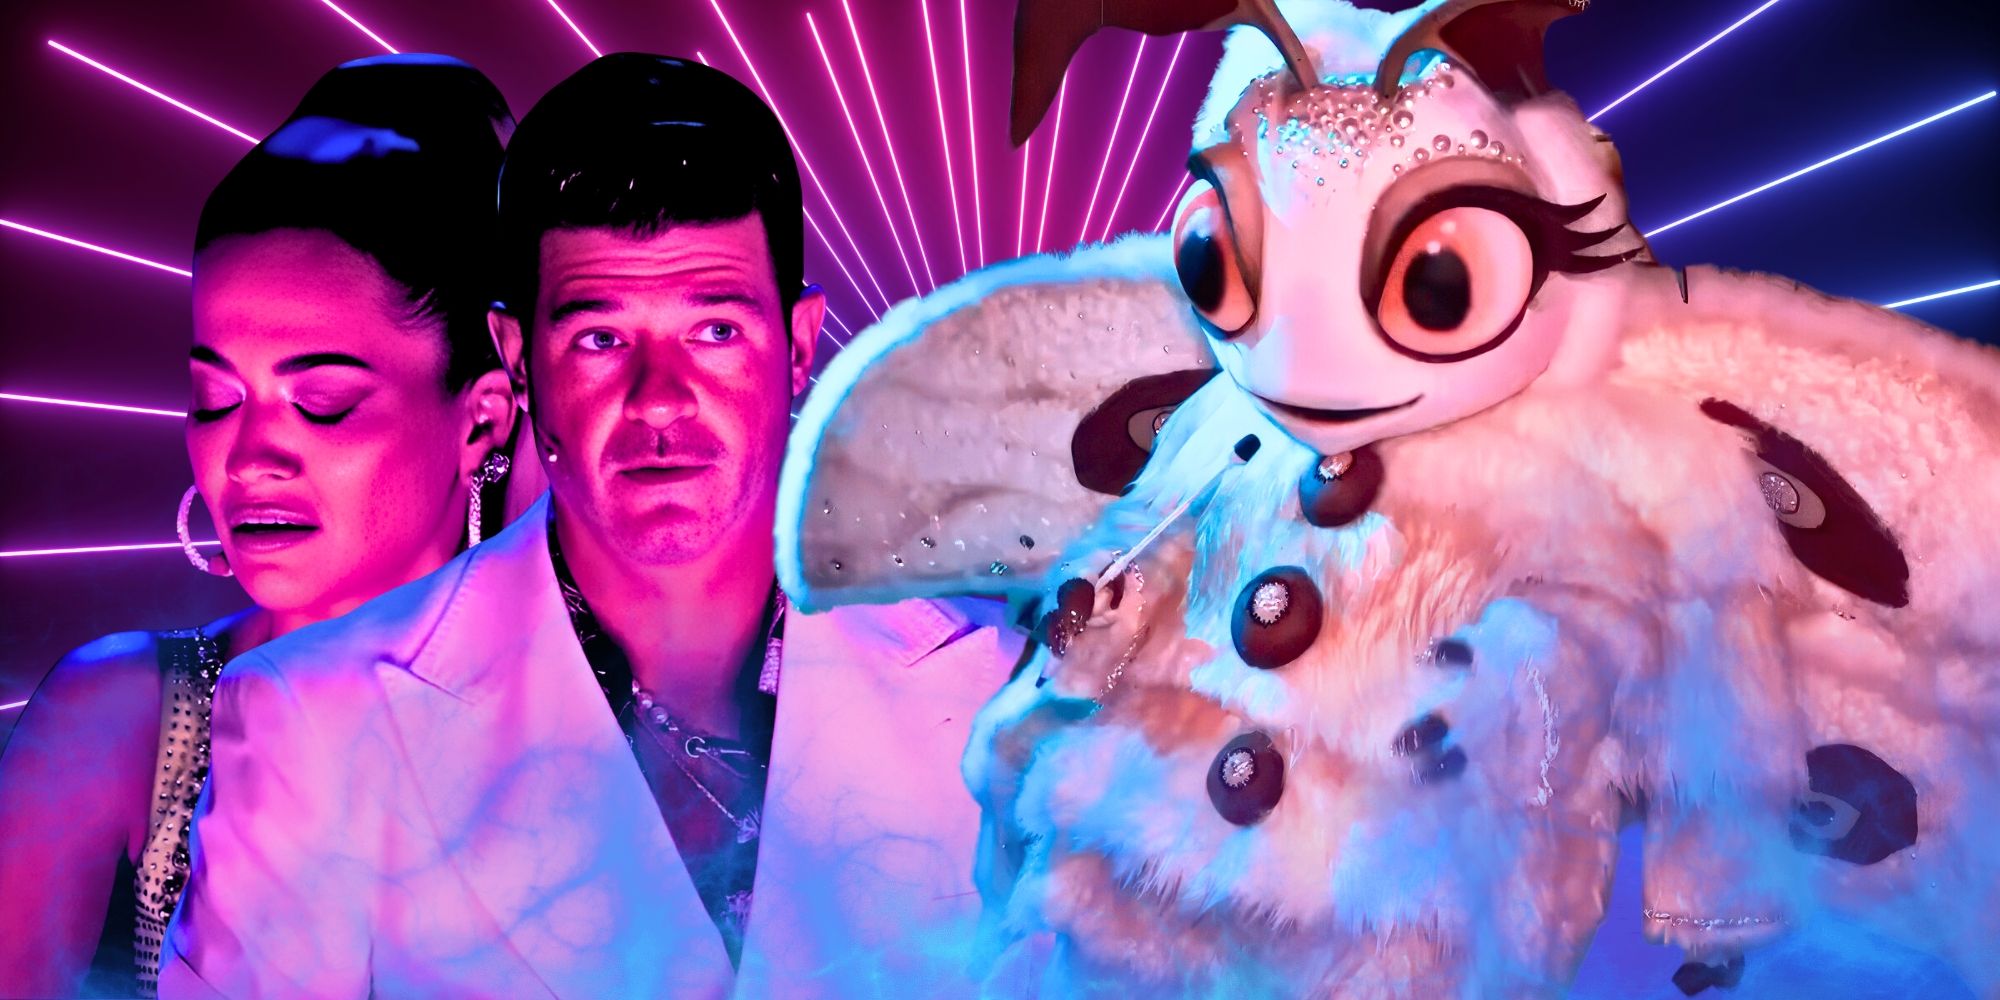 The Masked Singer's Rita Ora with her eyes closed, Robin Thicke looking intently and Poodle Moth performing with a microphone